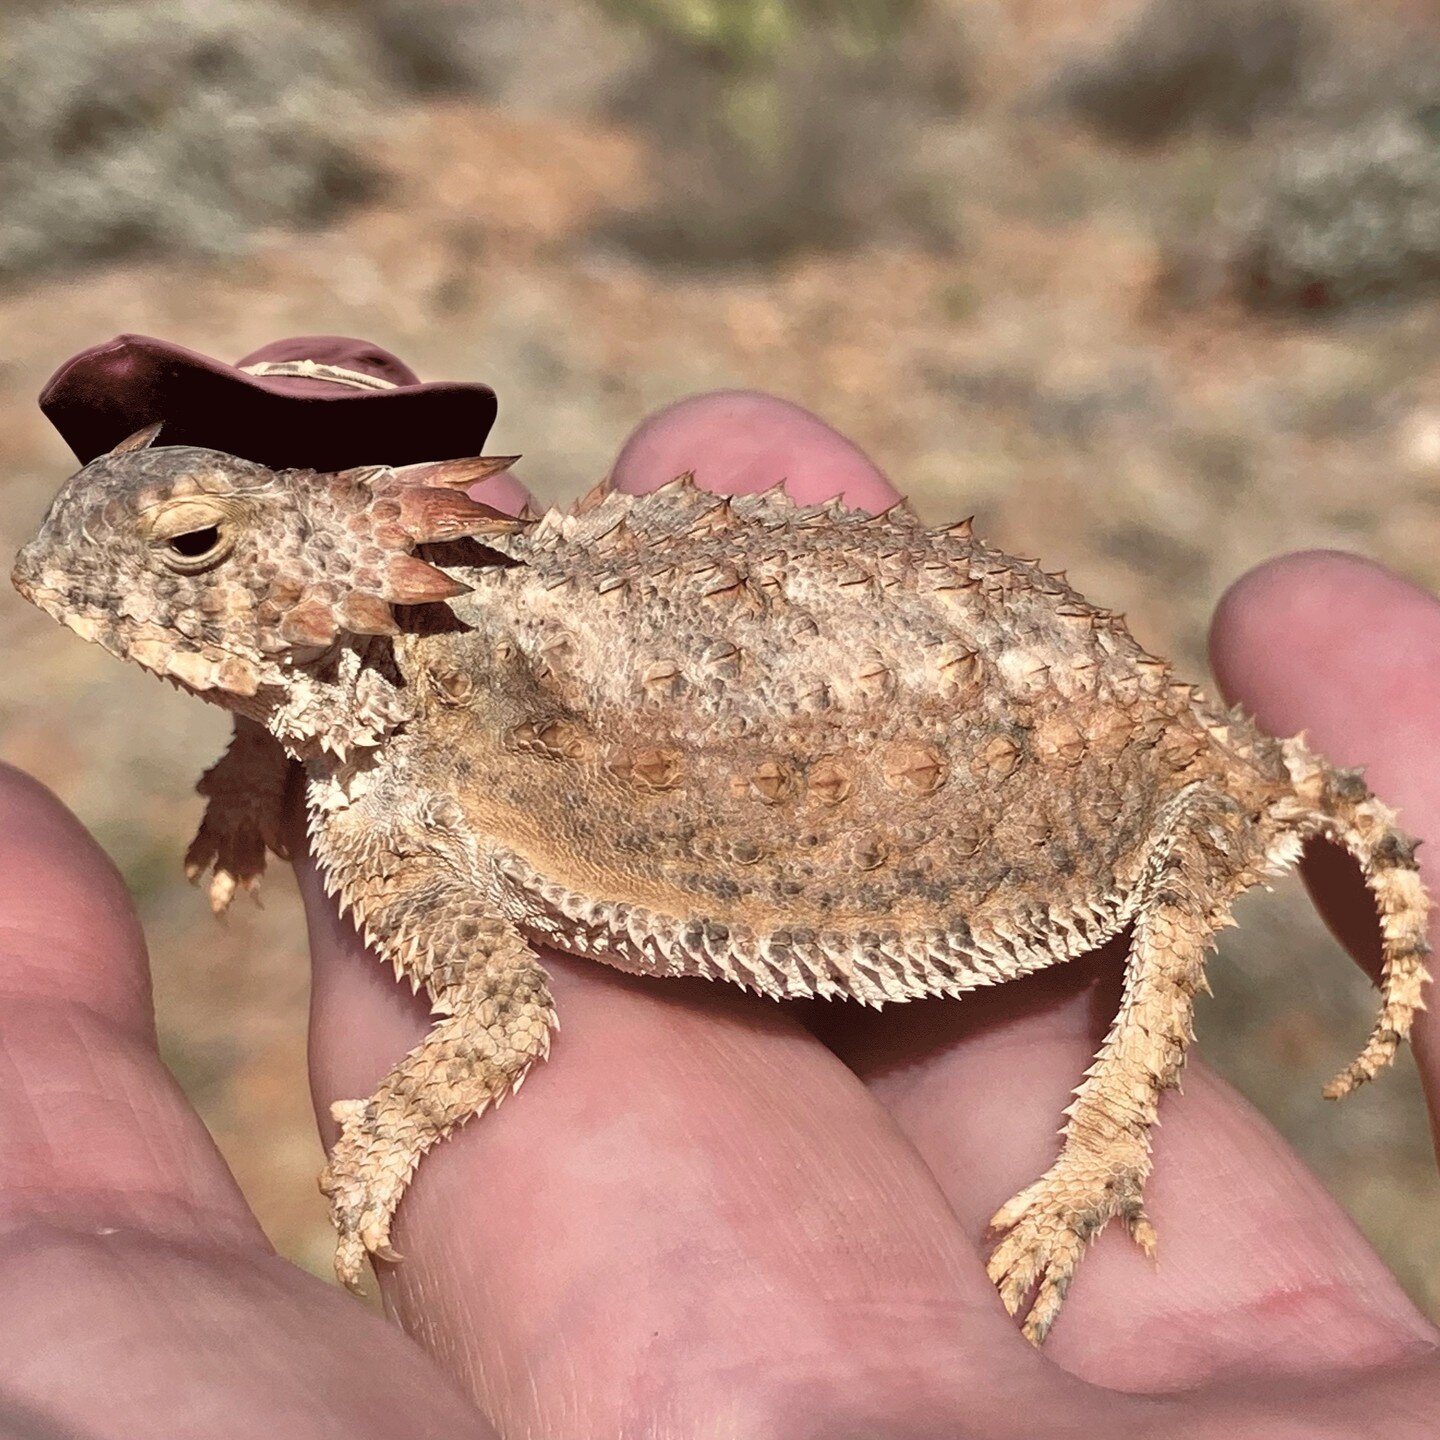 After I had shared this cute little guy (Horny Toad) with some friends, someone suggested that he would look good in a safari-type hat. That happens quite easily in Photoshop beta. #hornytoad #hornytoads #lizard #hornedlizard #arizona #photoshopbeta 